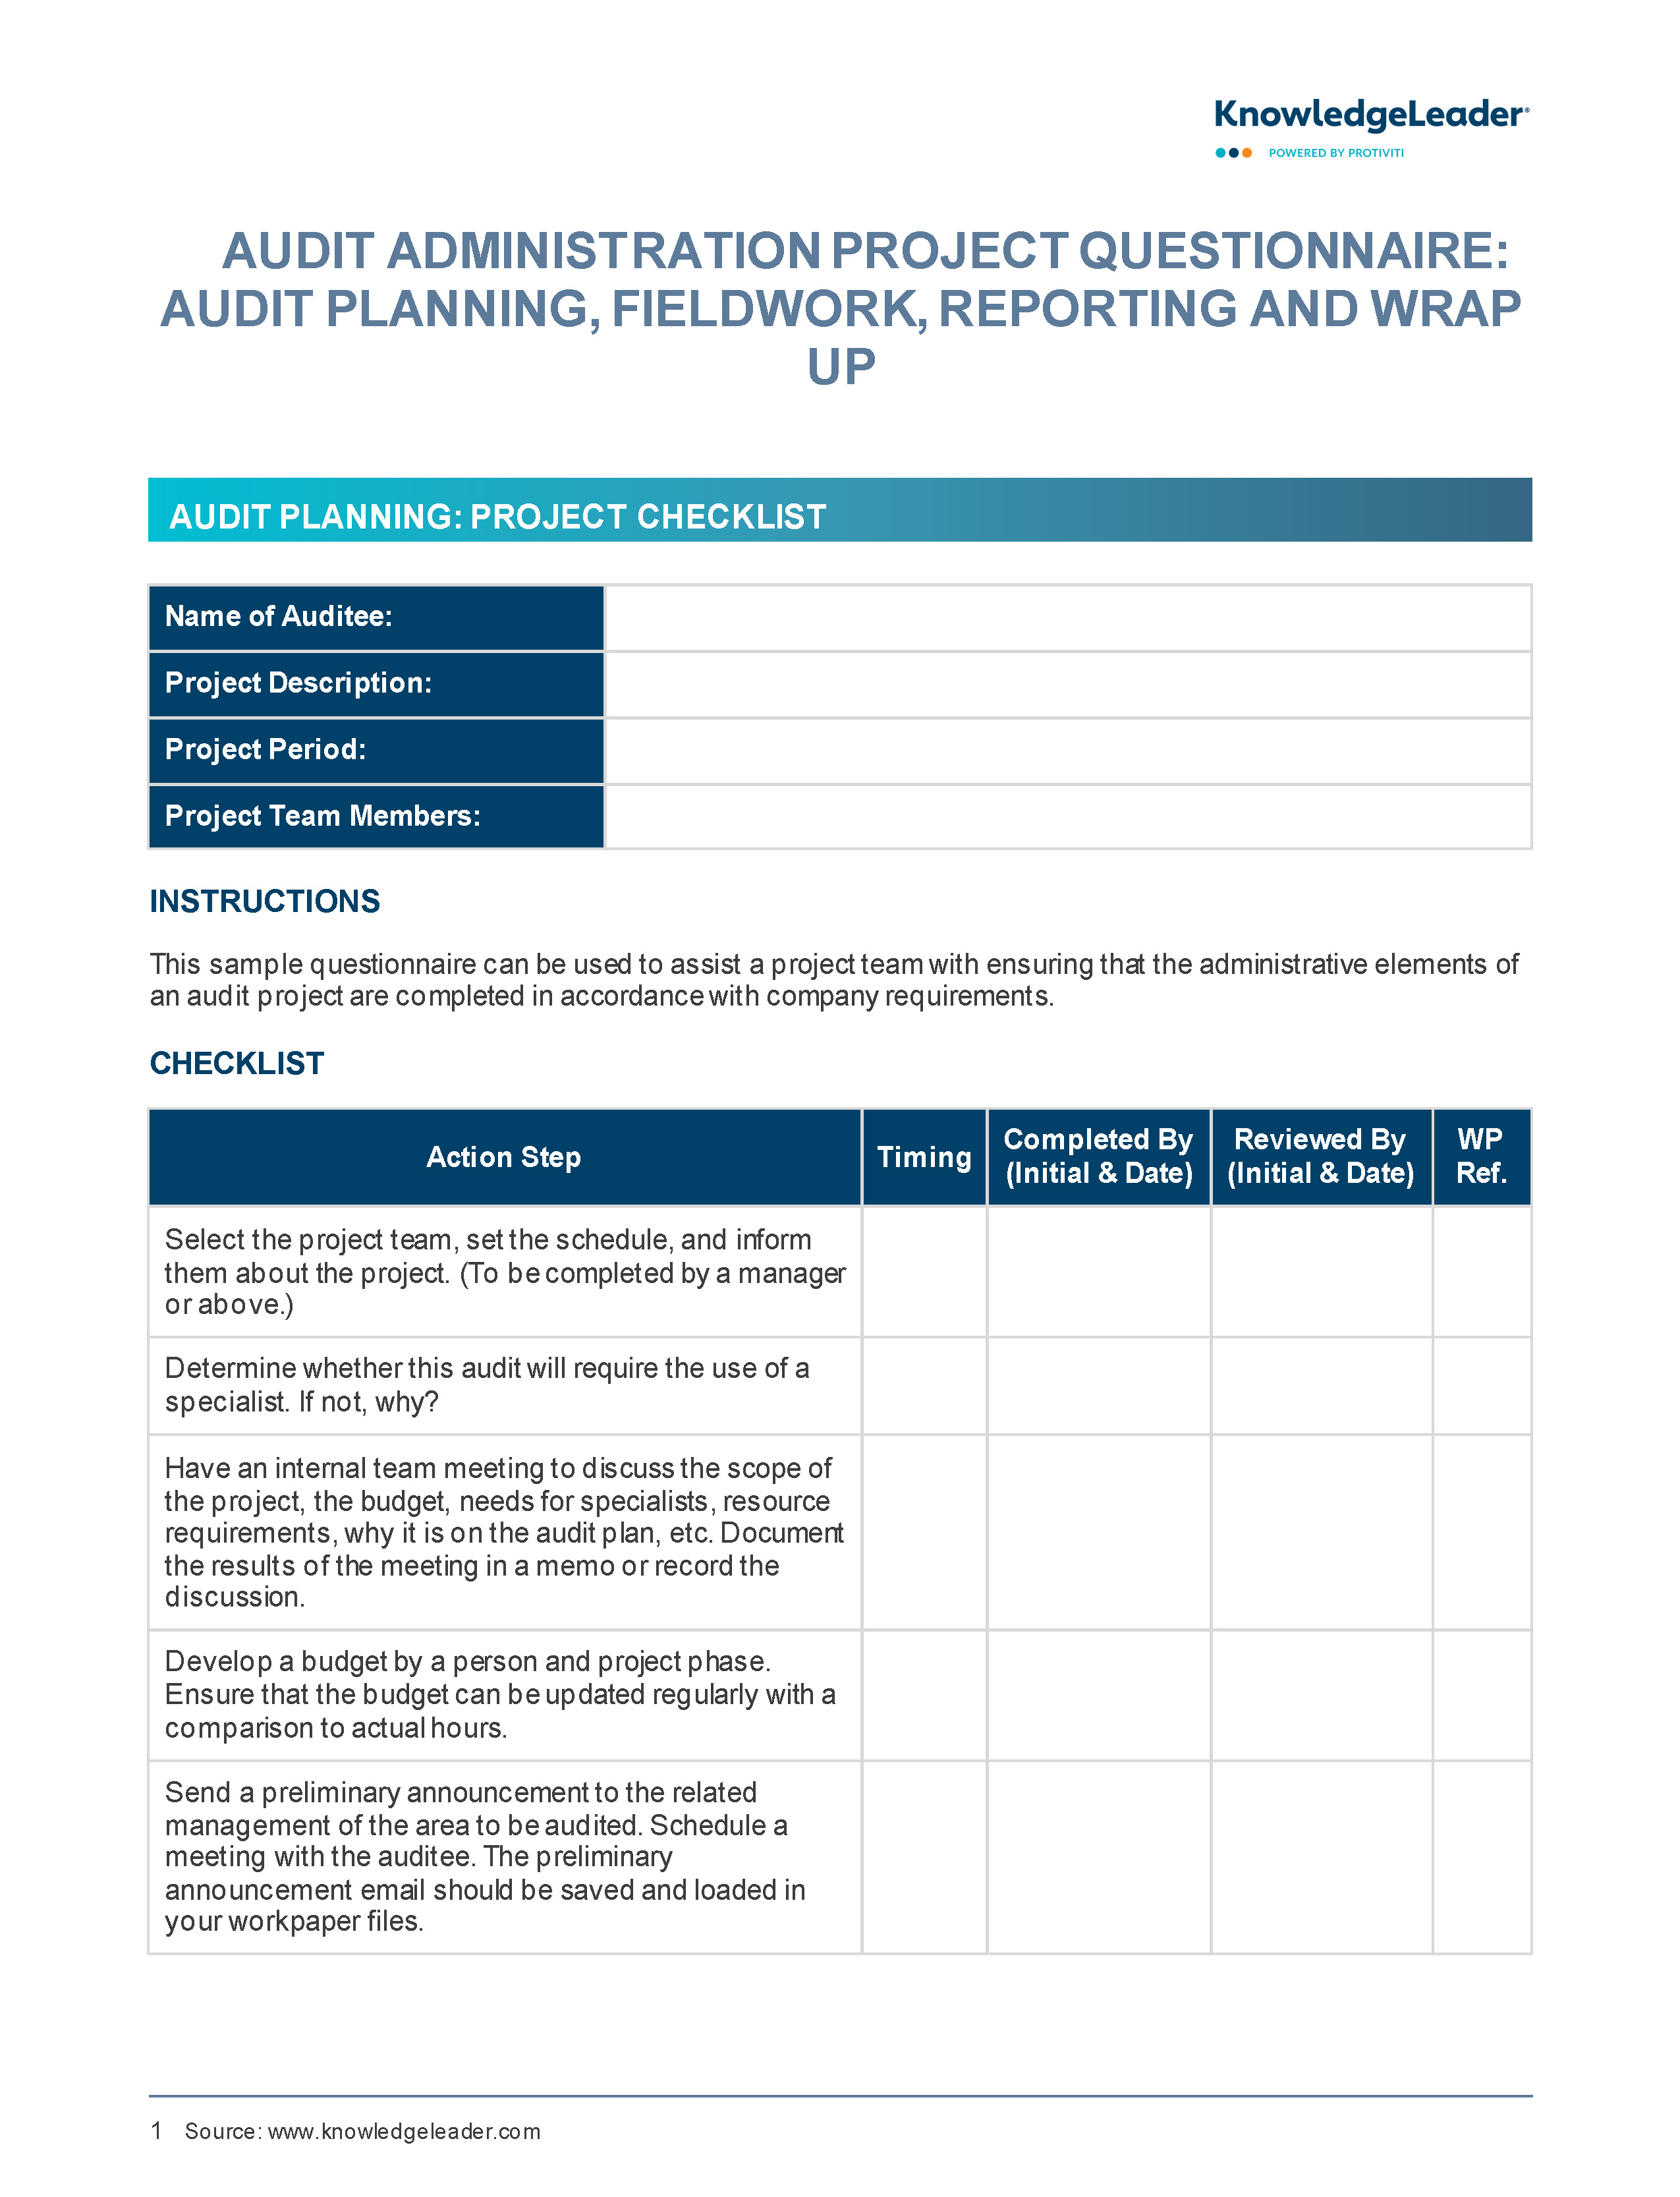 Screenshot of the first page of Audit Administration Project Questionnaire Audit Planning Fieldwork Reporting and Wrap Up